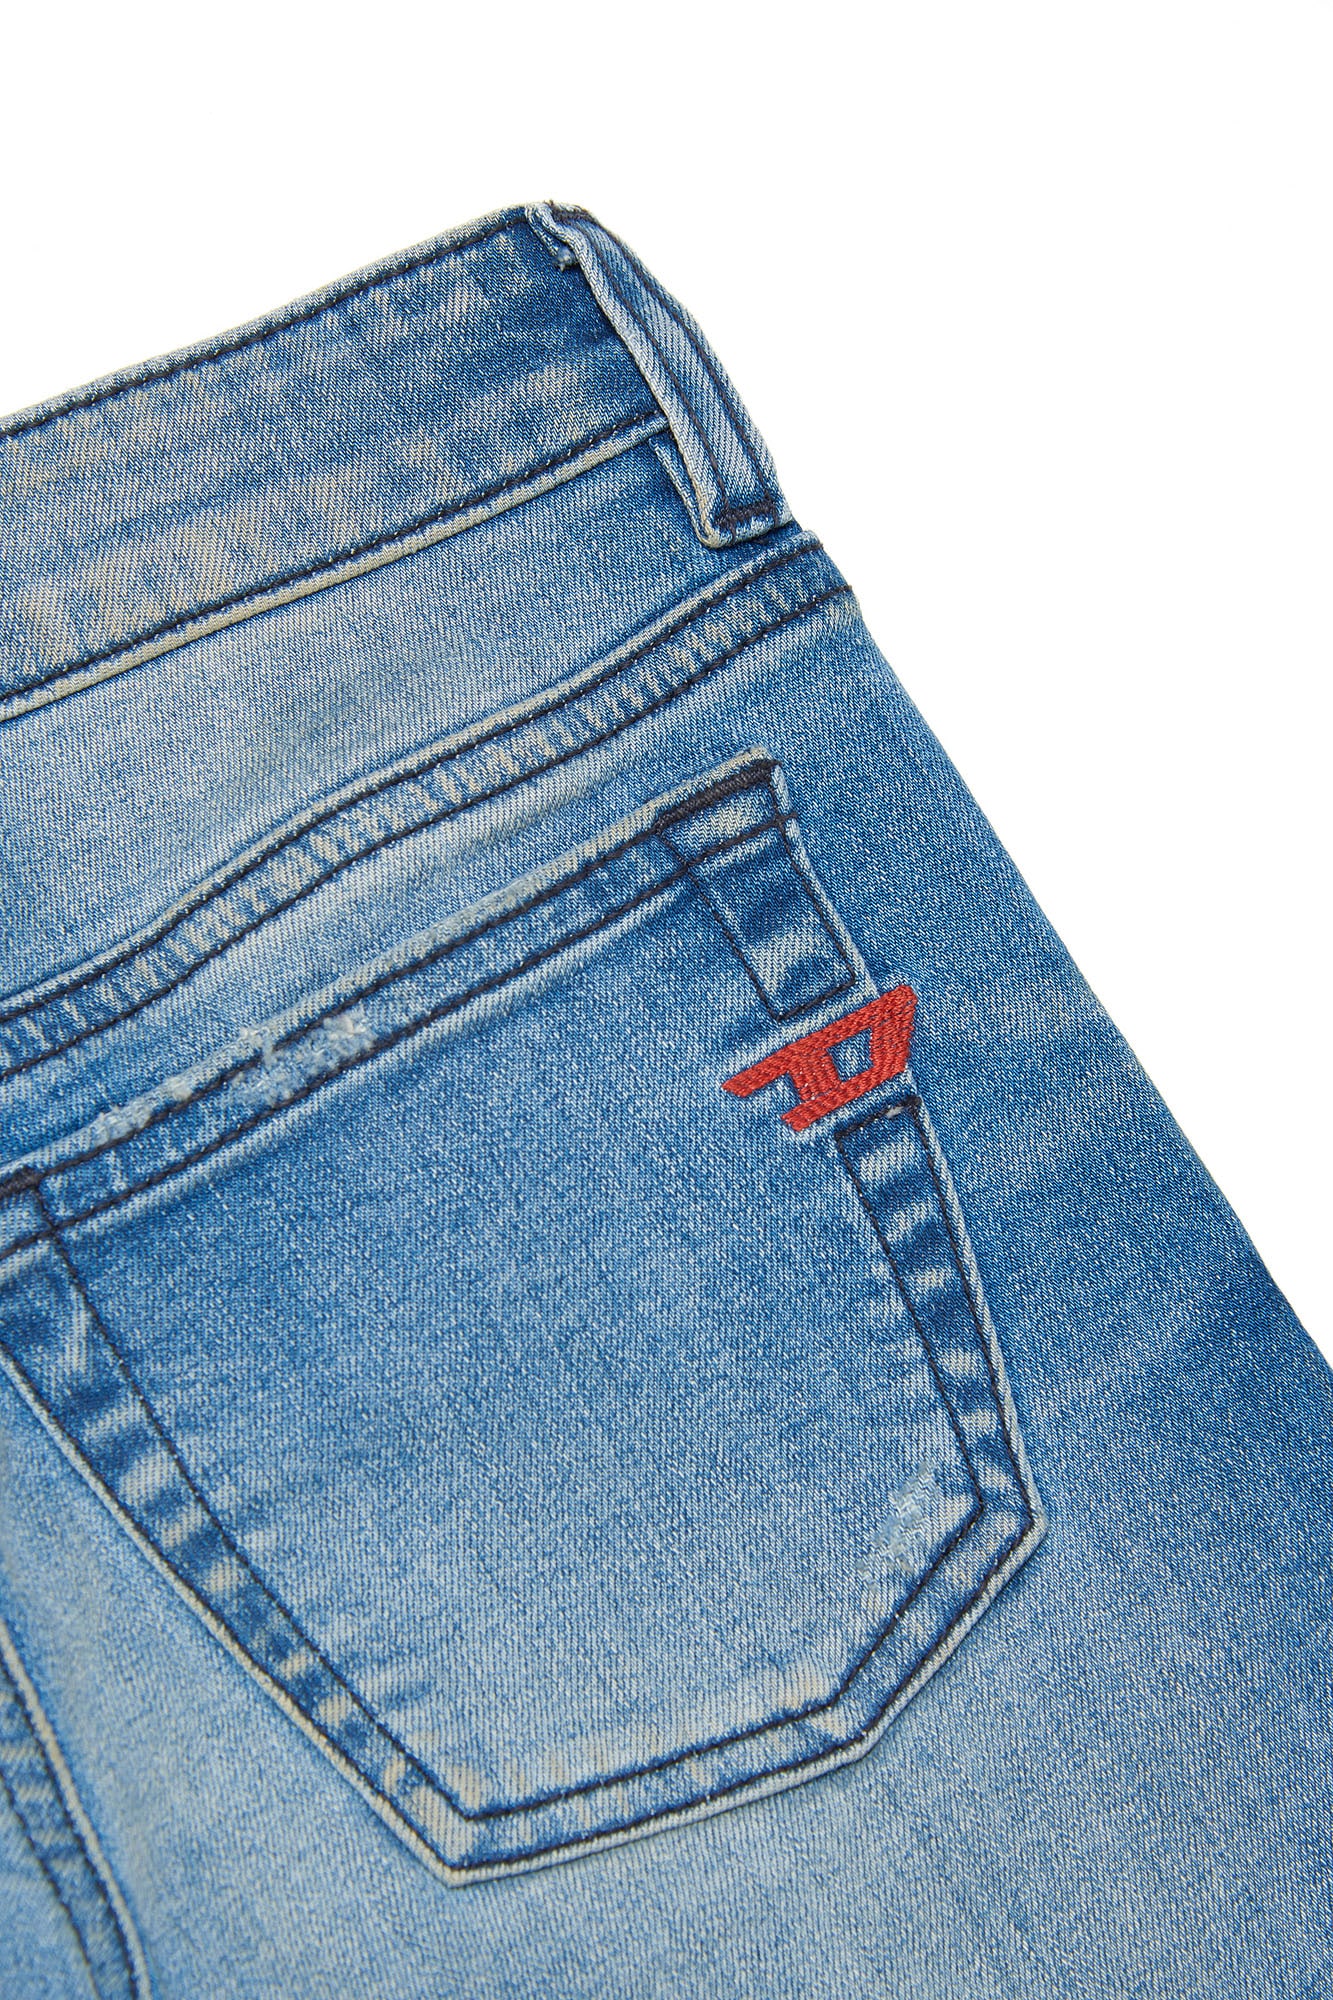 Diesel boys blue jeans with fade - close up